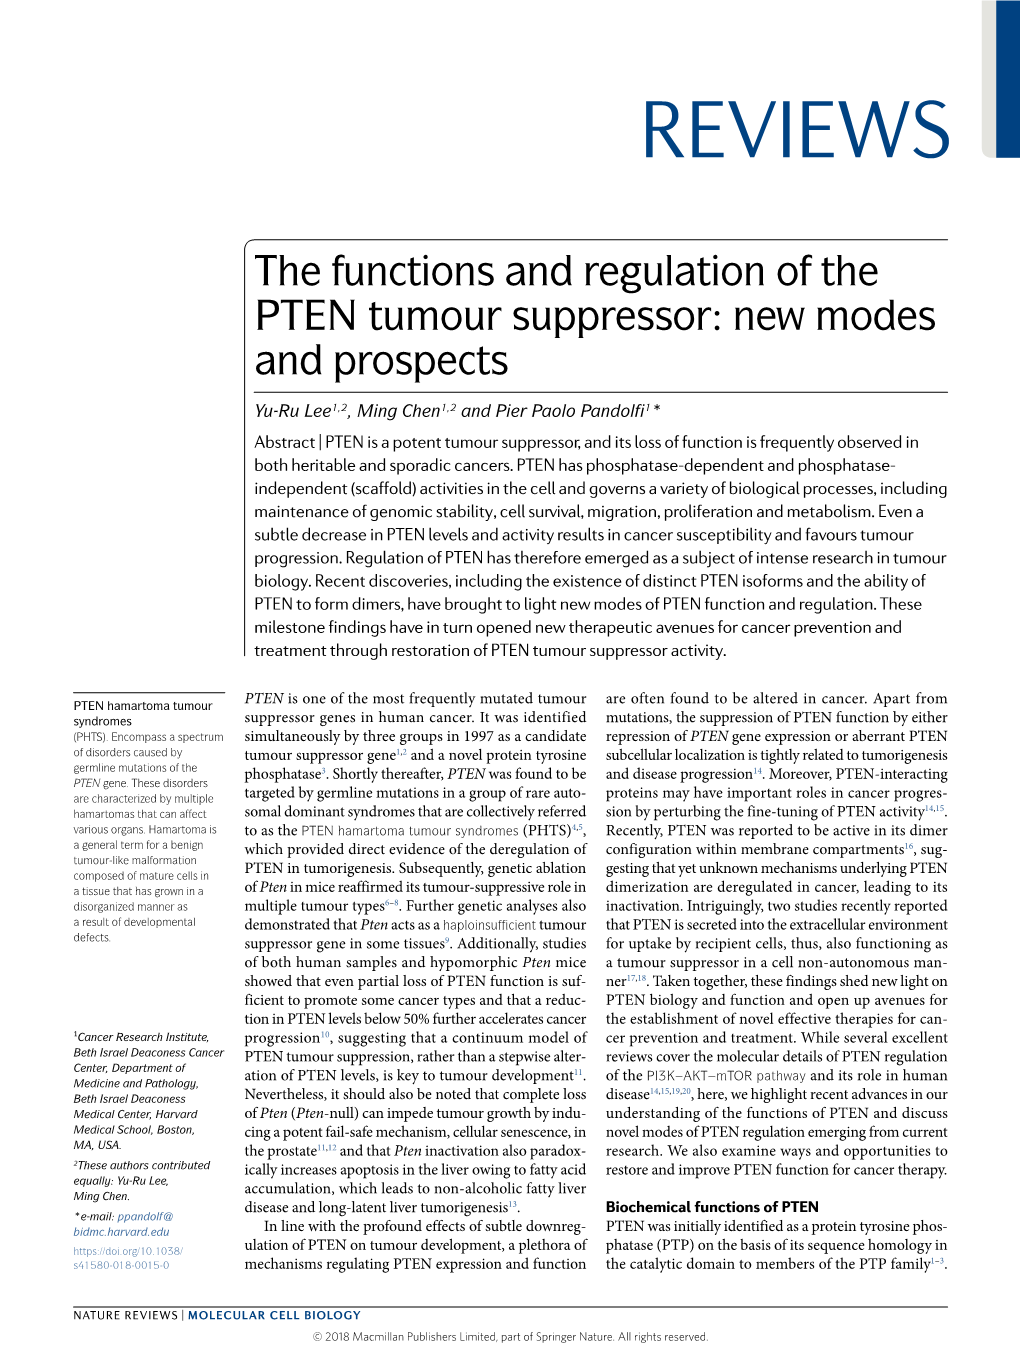 The Functions and Regulation of the PTEN Tumour Suppressor: New Modes and Prospects